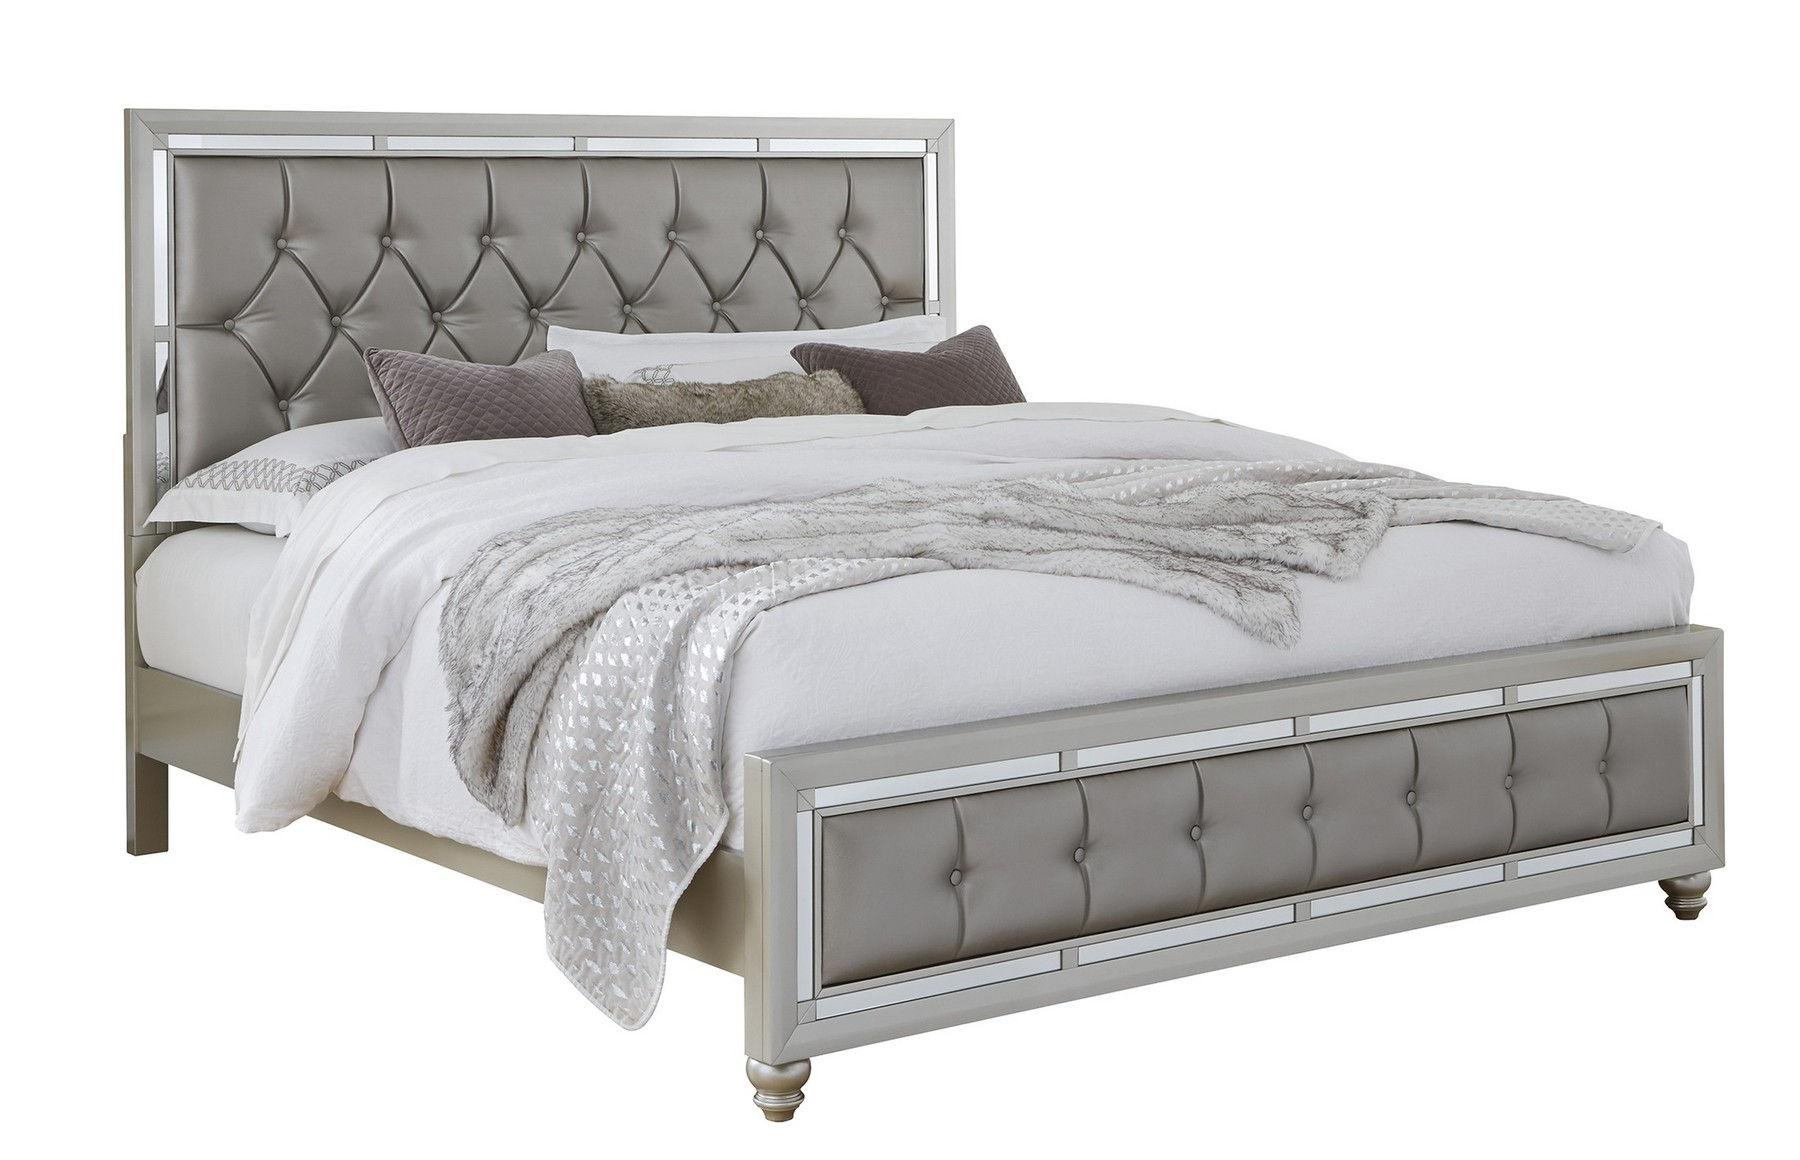 Casual Platform Bed RILEY RILEY-QB in Gray Leatherette